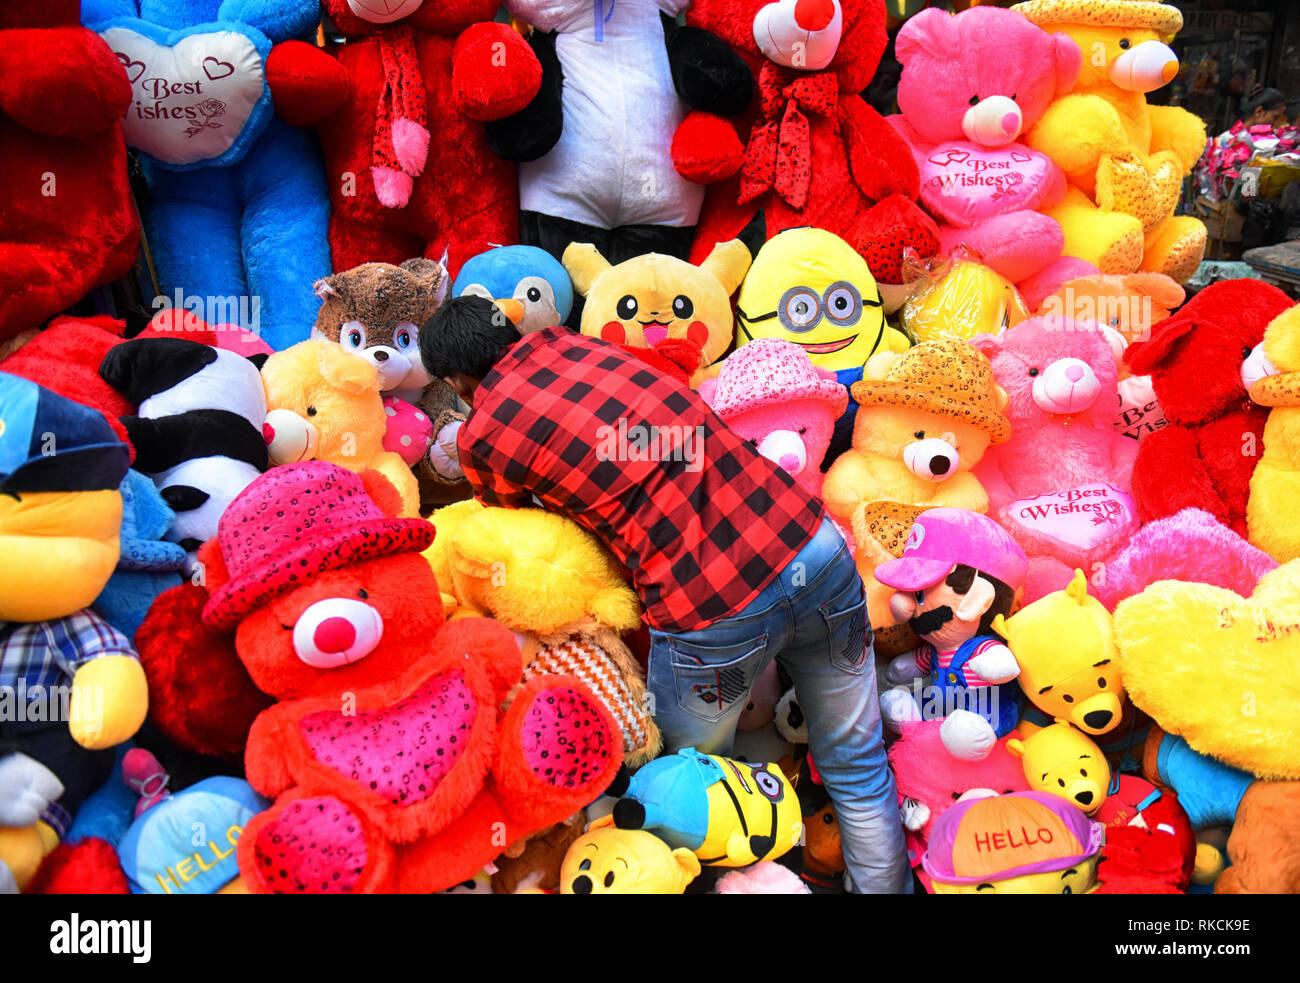 A street vendor seen placing the Teddy bear dolls for sell at his shop  ahead of the Teddy day celebration of the ongoing Valentine week in  Kolkata, India Stock Photo - Alamy